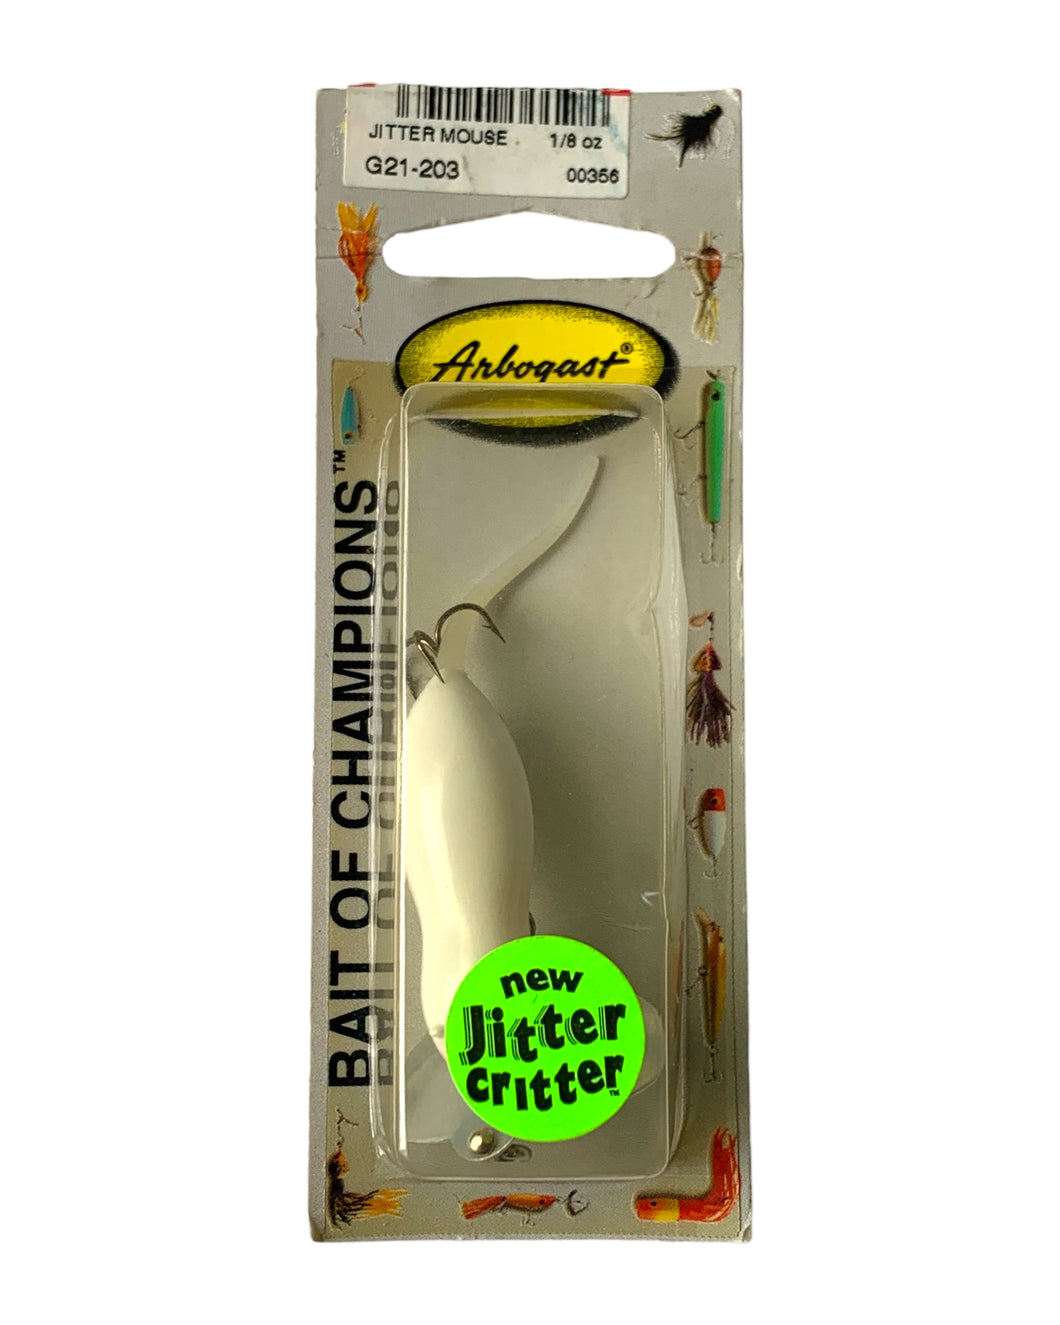 Fred Arbogast JITTER CRITTER MOUSE Topwater Fishing Lure in WHITE